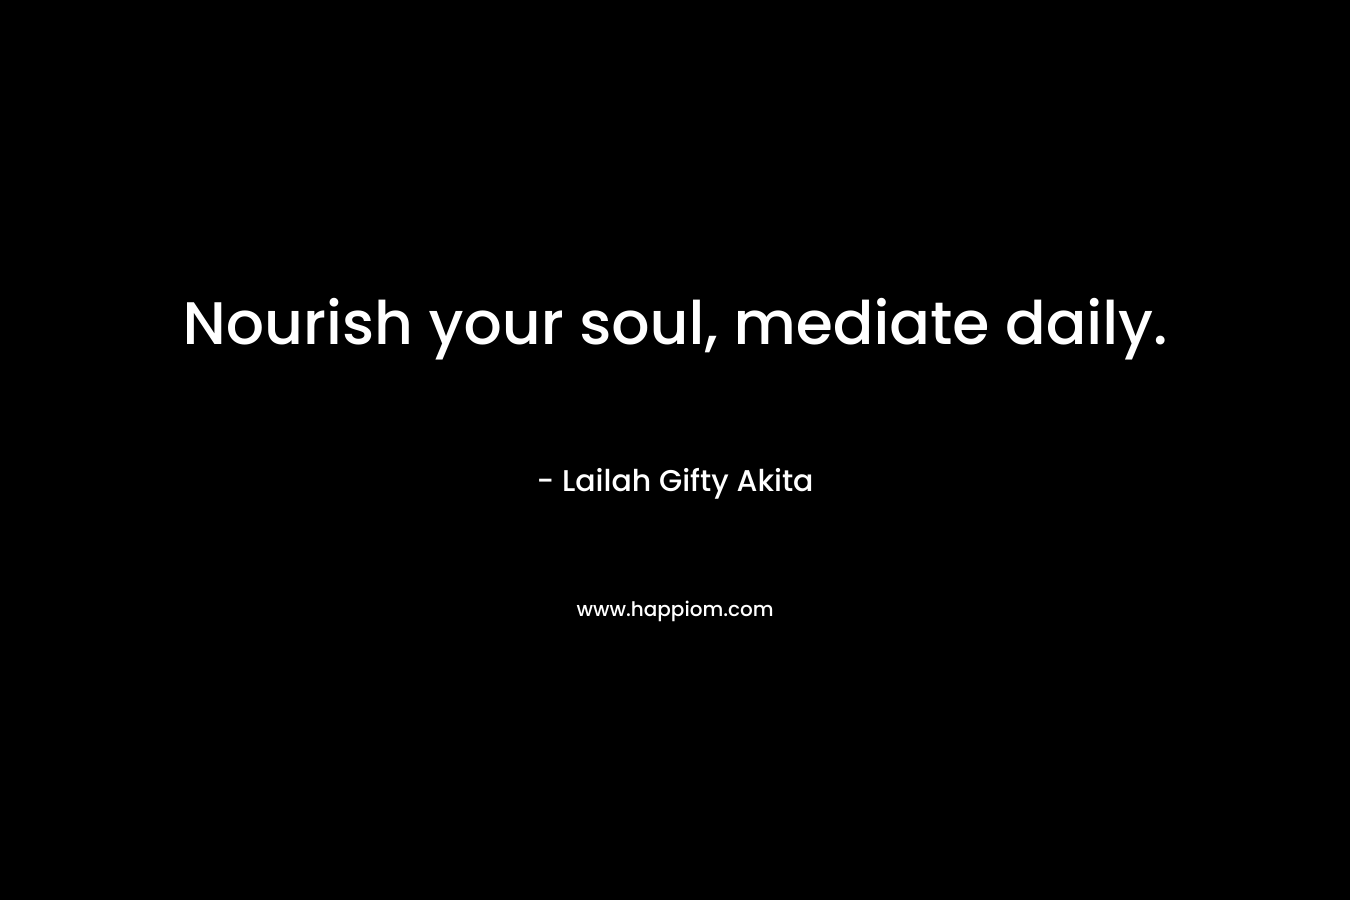 Nourish your soul, mediate daily.